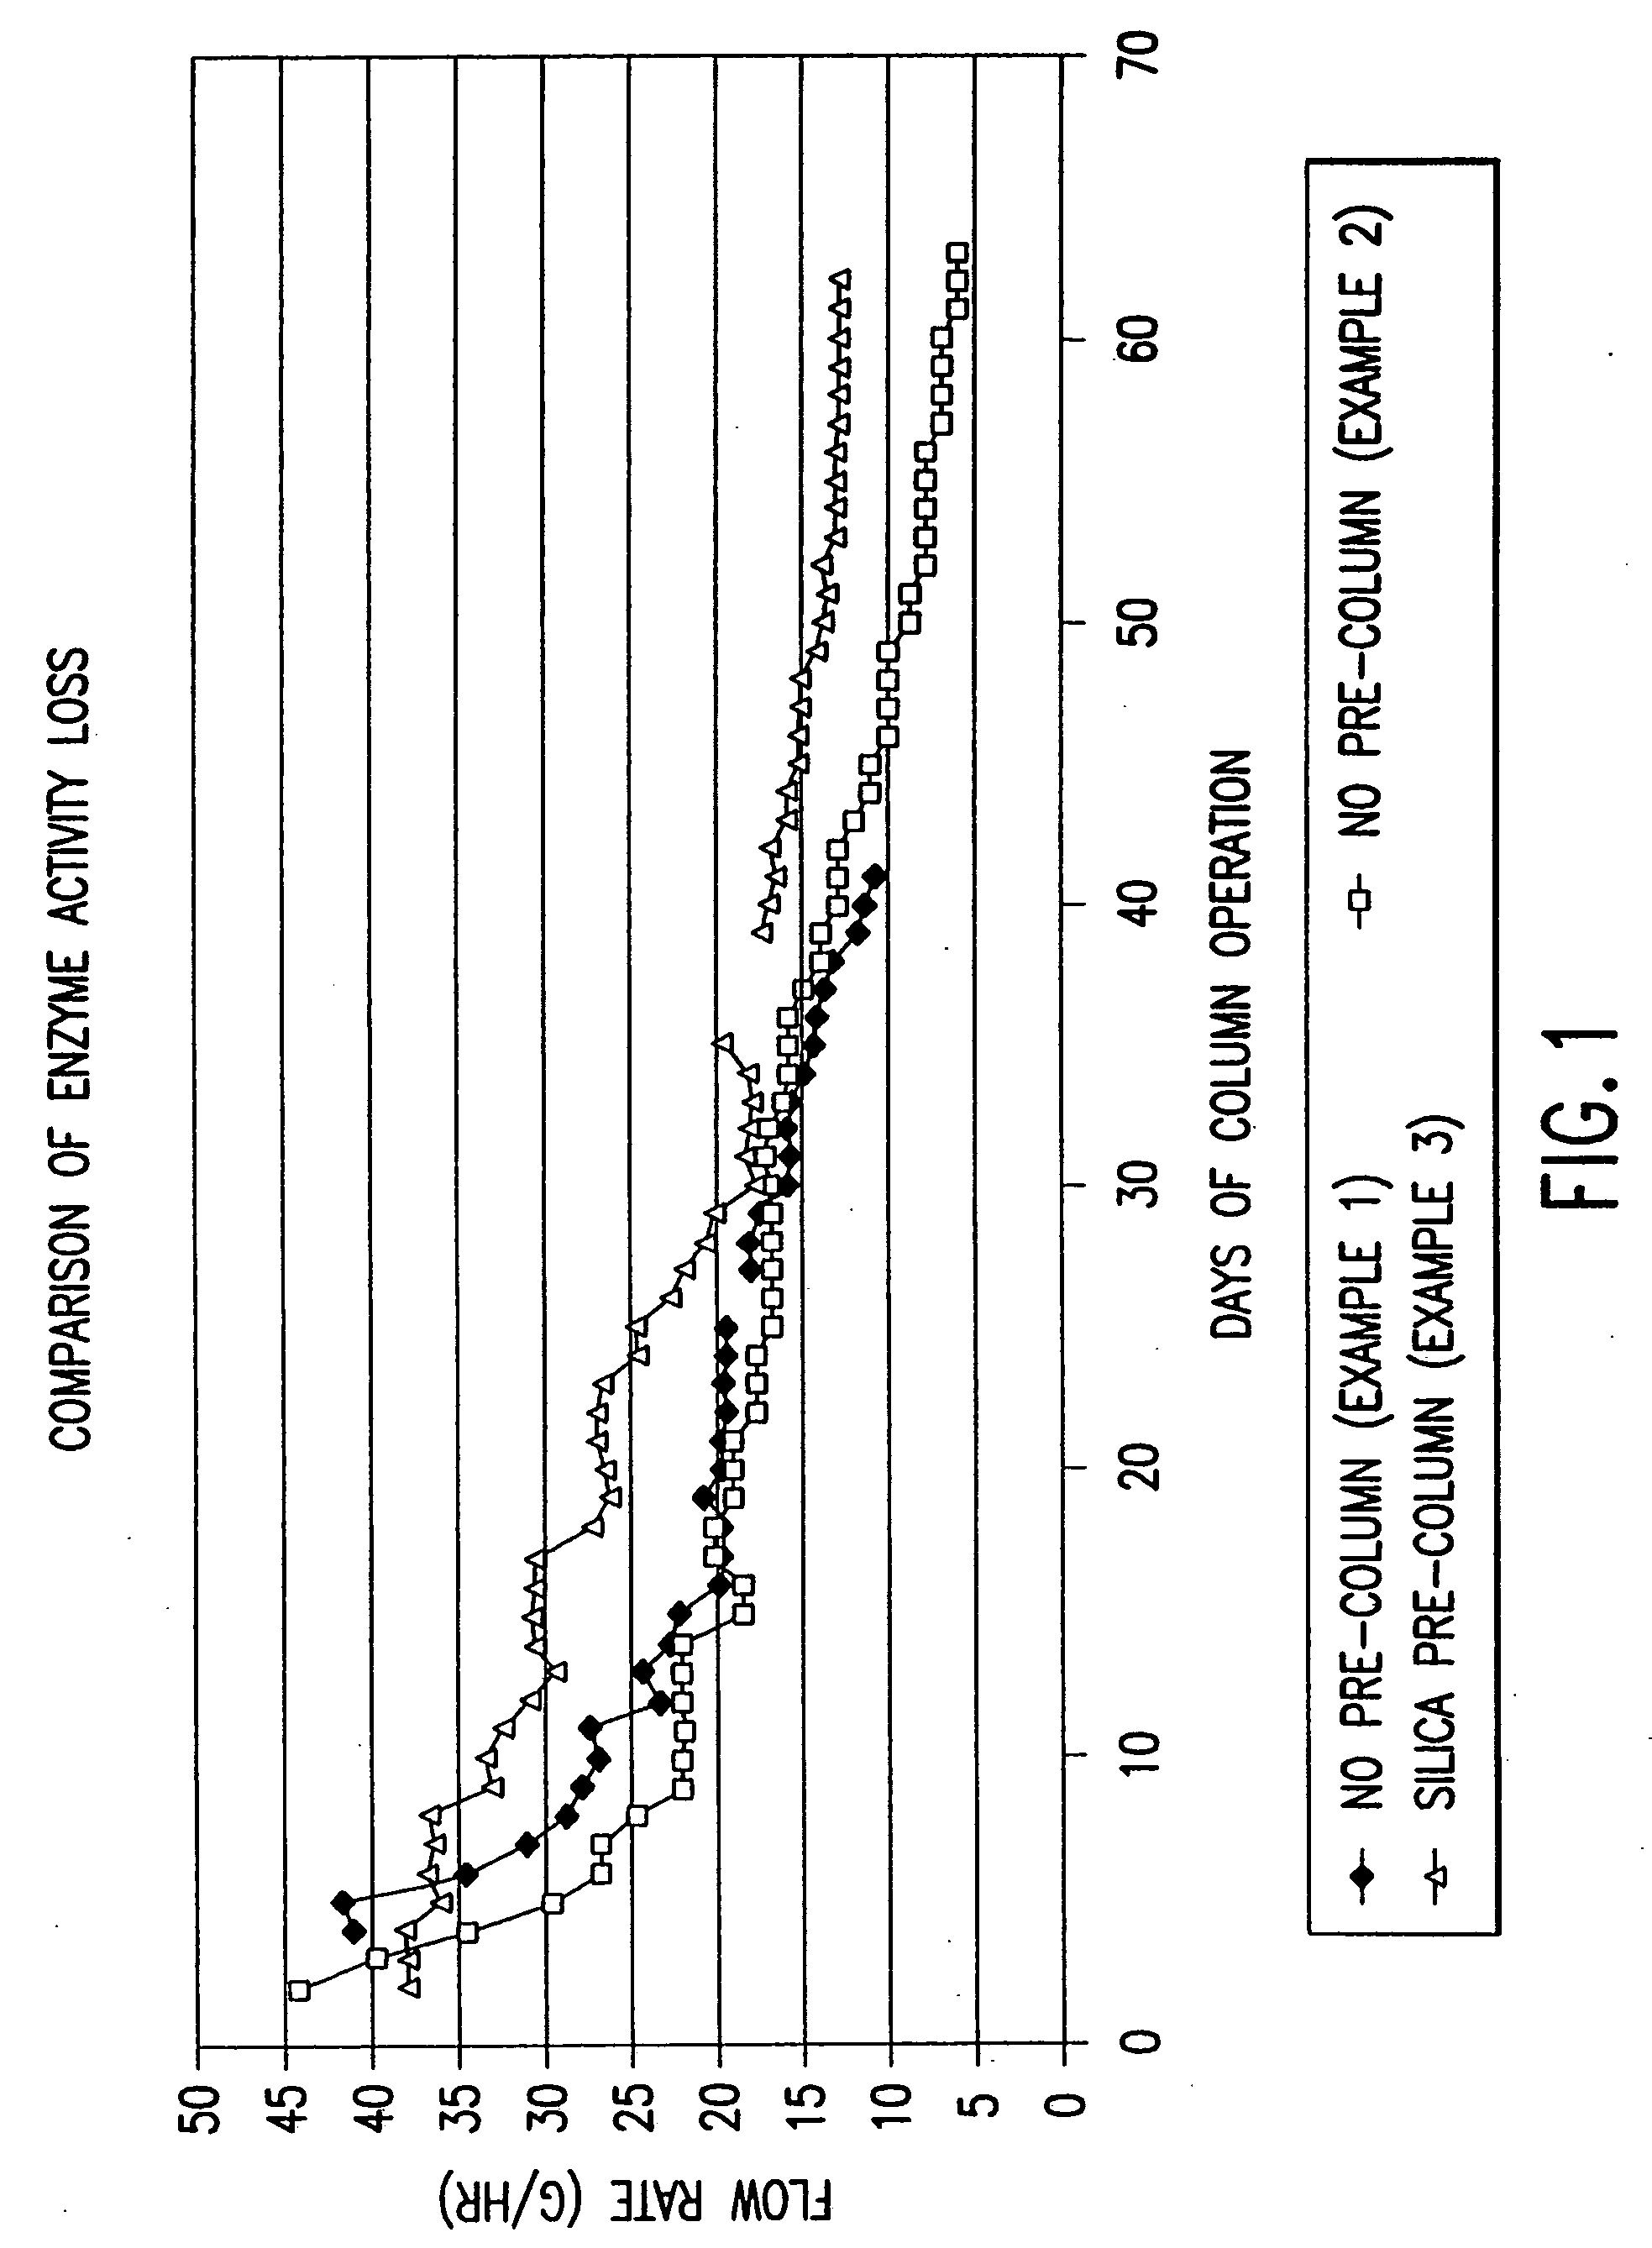 Method for producing fats or oils